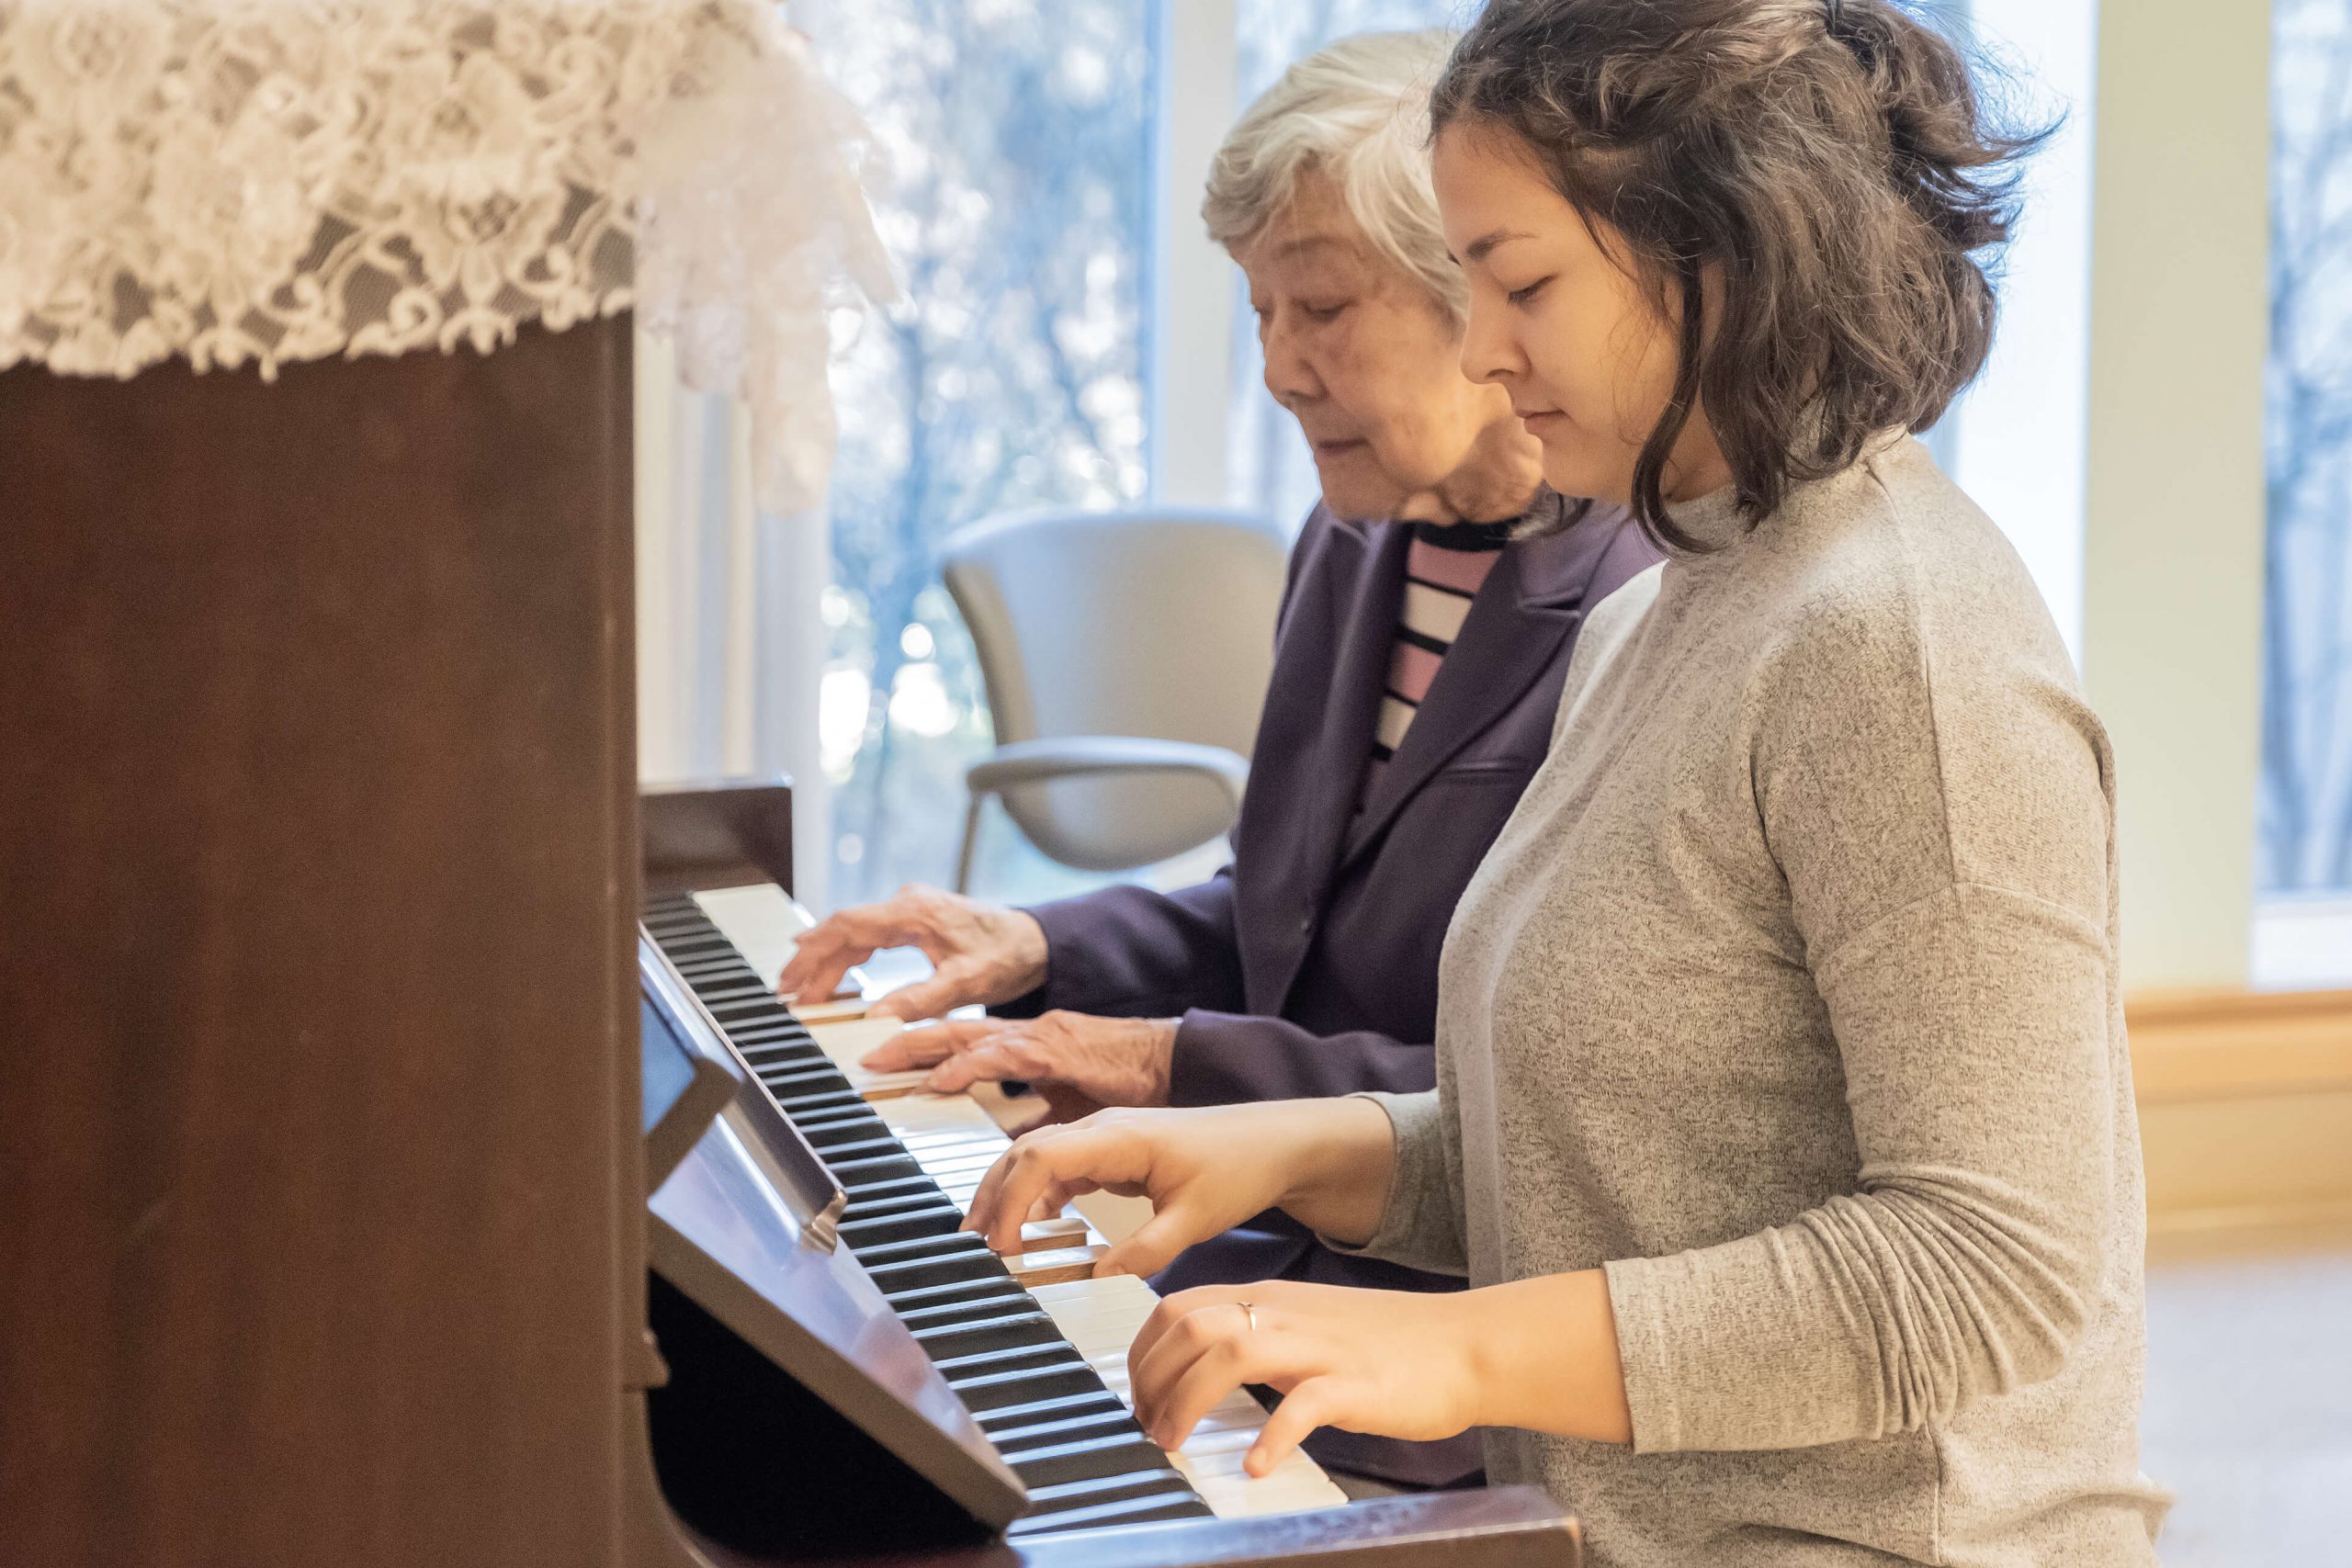 Soothing dementia patients through music